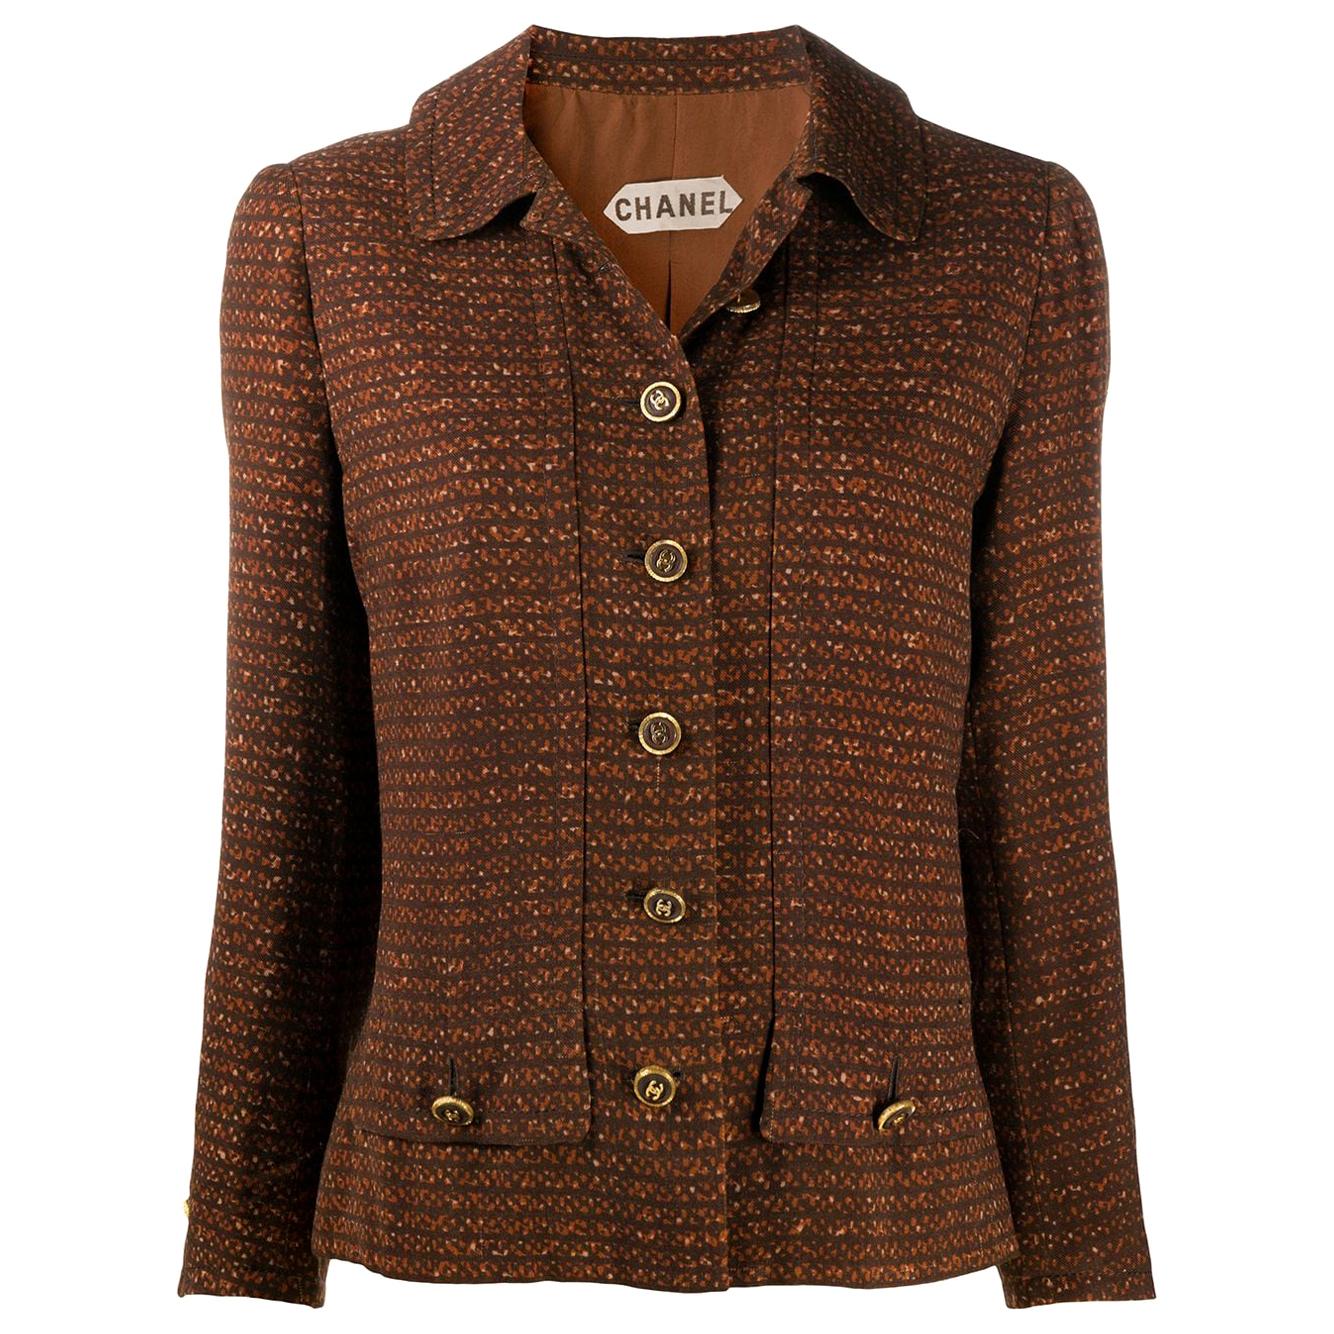 Chanel Haute Couture Brown Textured Jacket